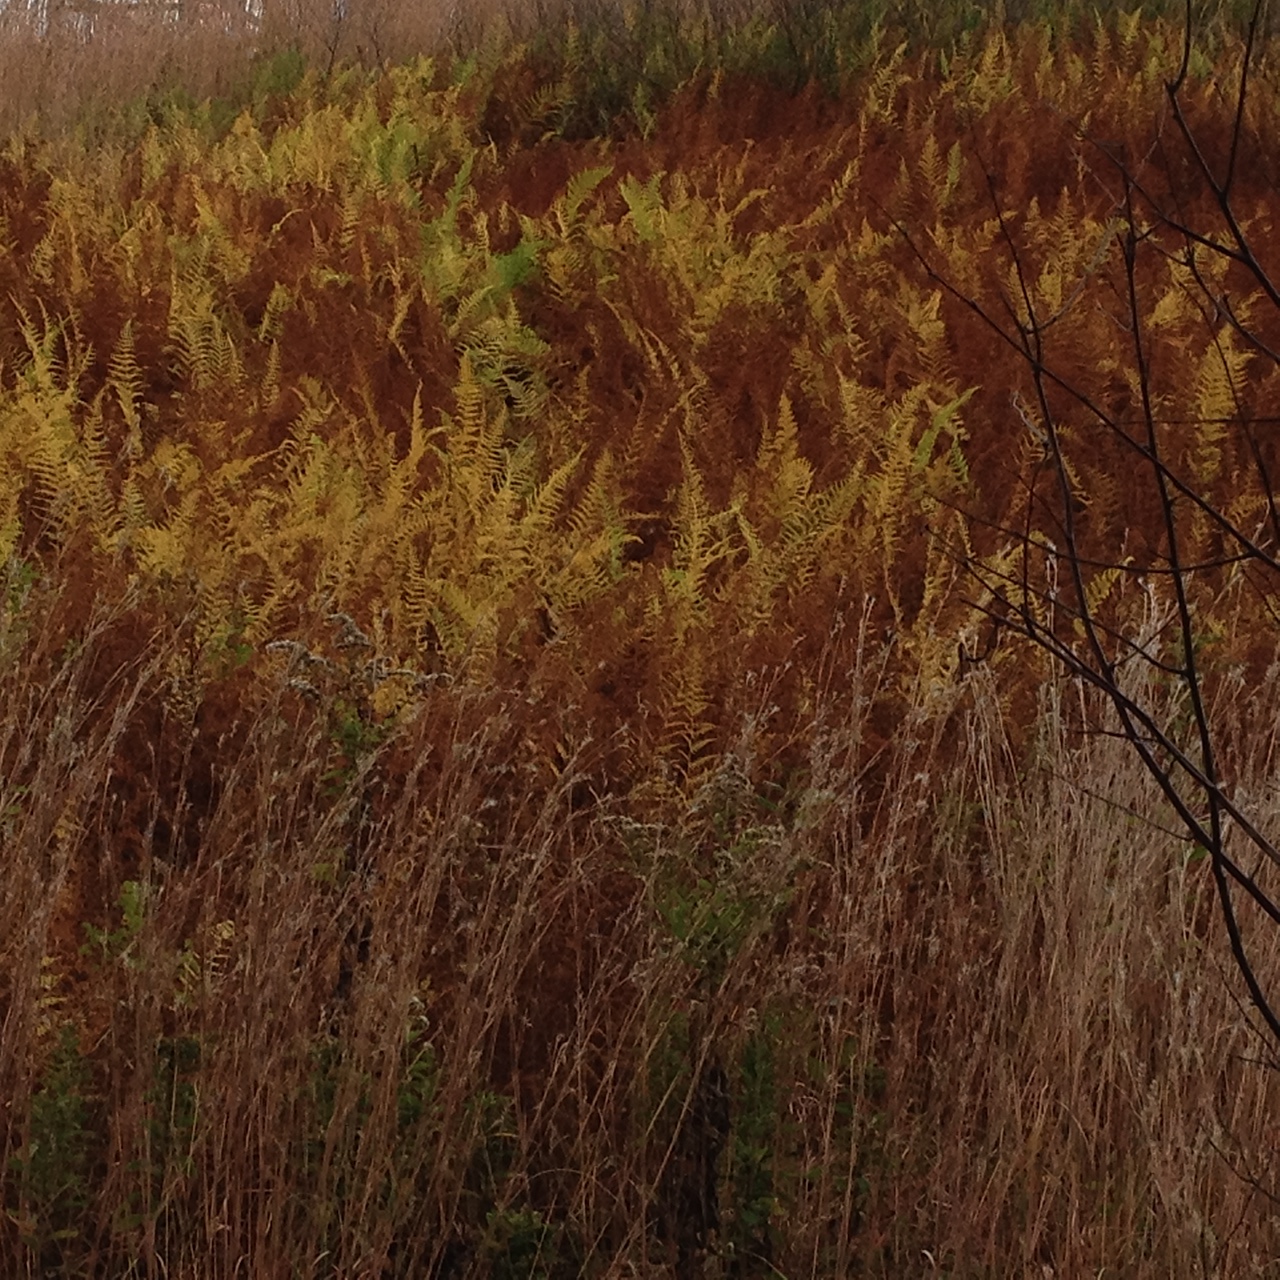 Native plant : fern and grasses in fall